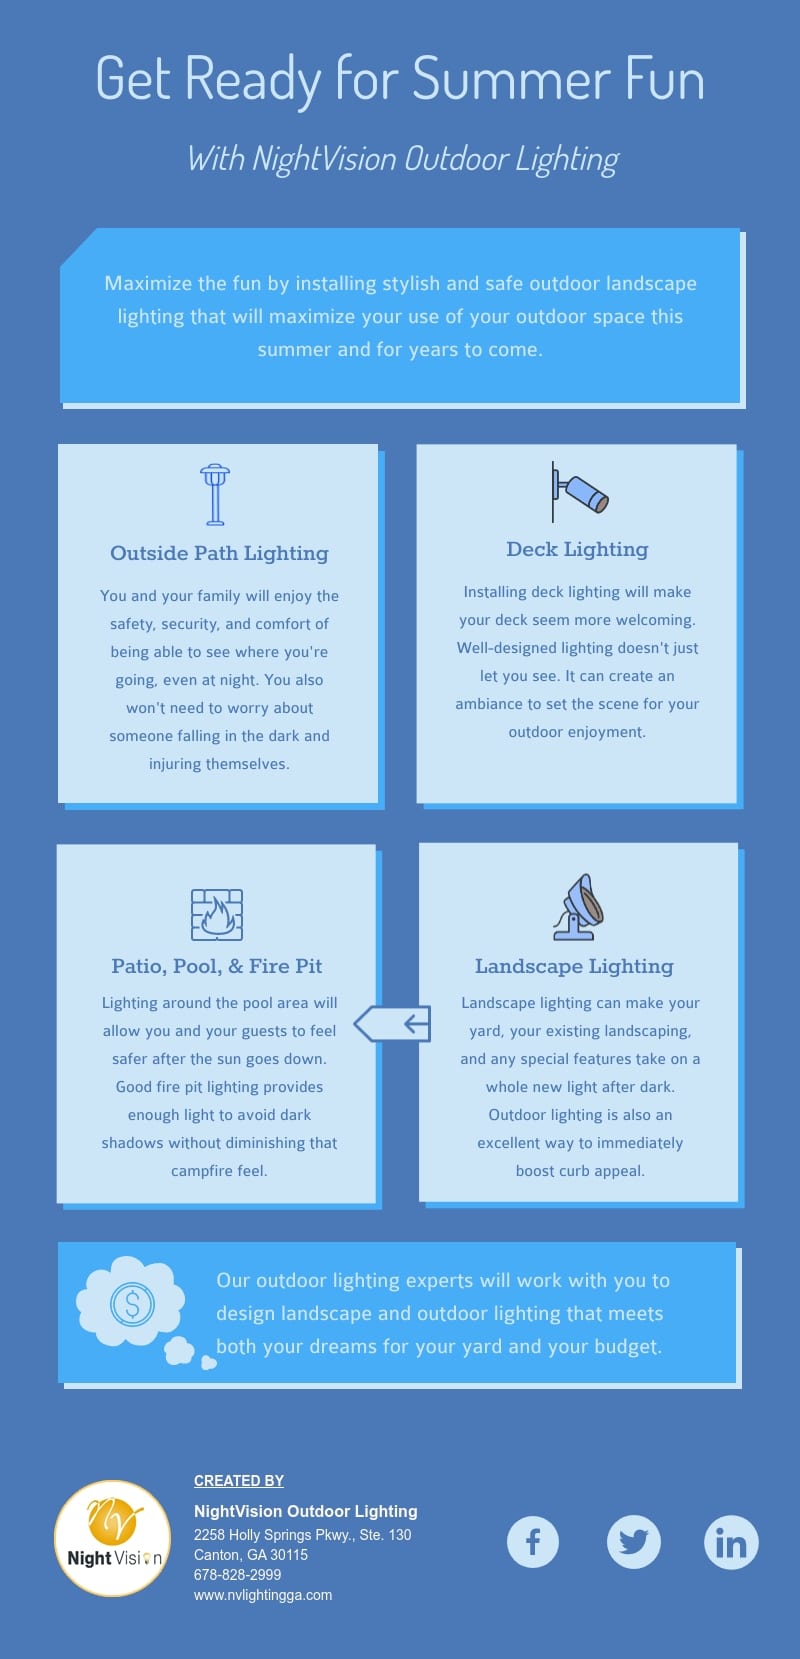 Get Ready for Summer Fun with NightVision Outdoor Lighting [infographic]